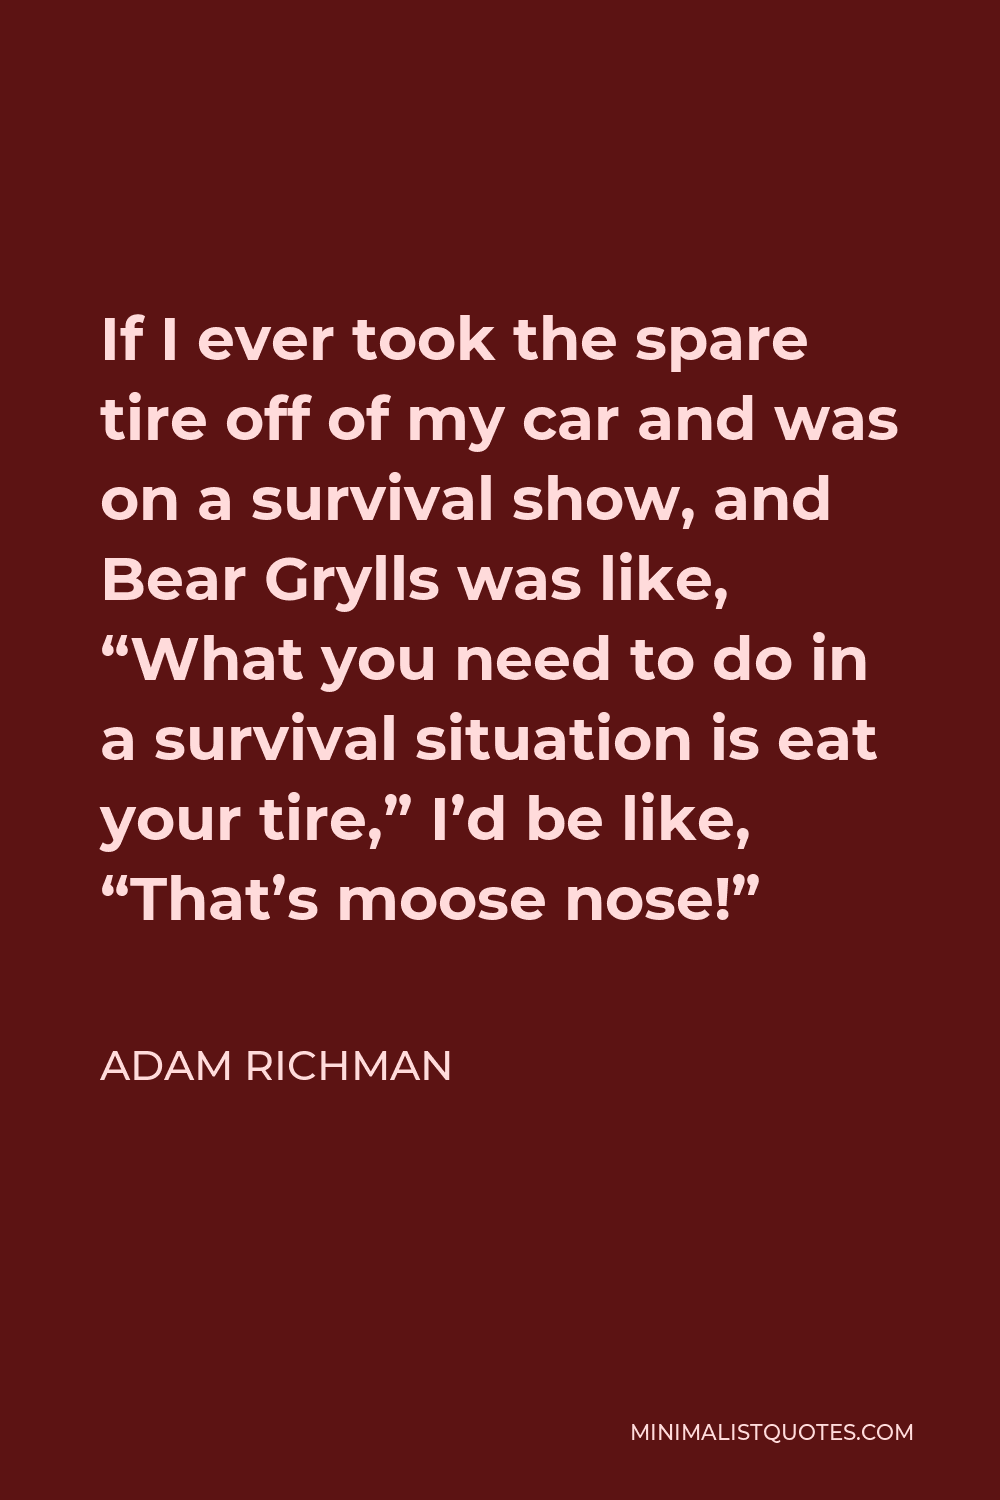 Adam Richman Quote - If I ever took the spare tire off of my car and was on a survival show, and Bear Grylls was like, “What you need to do in a survival situation is eat your tire,” I’d be like, “That’s moose nose!”